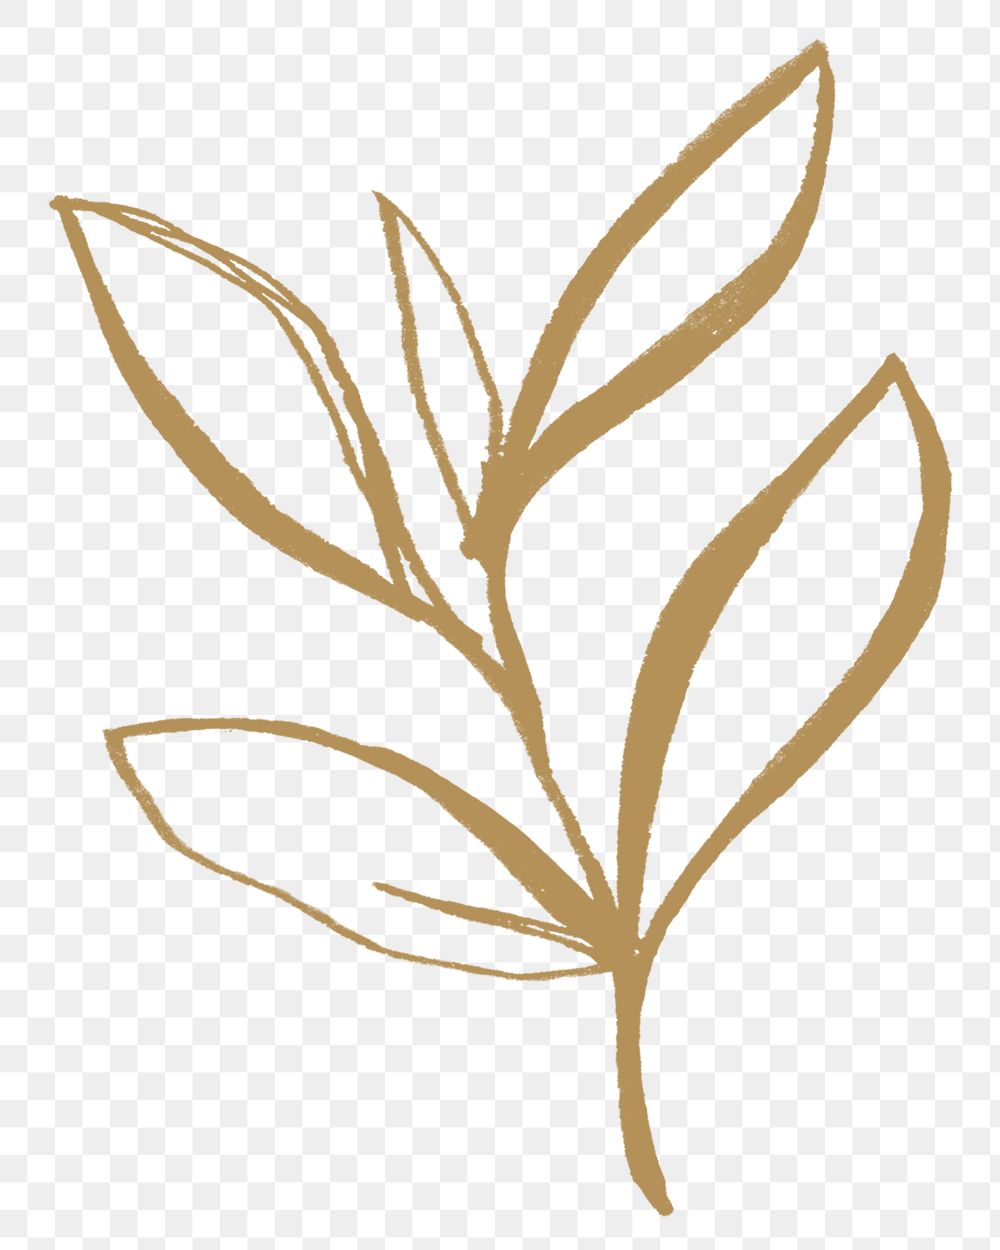 Png leaf aesthetic sticker, gold illustration, remixed from vintage public domain images